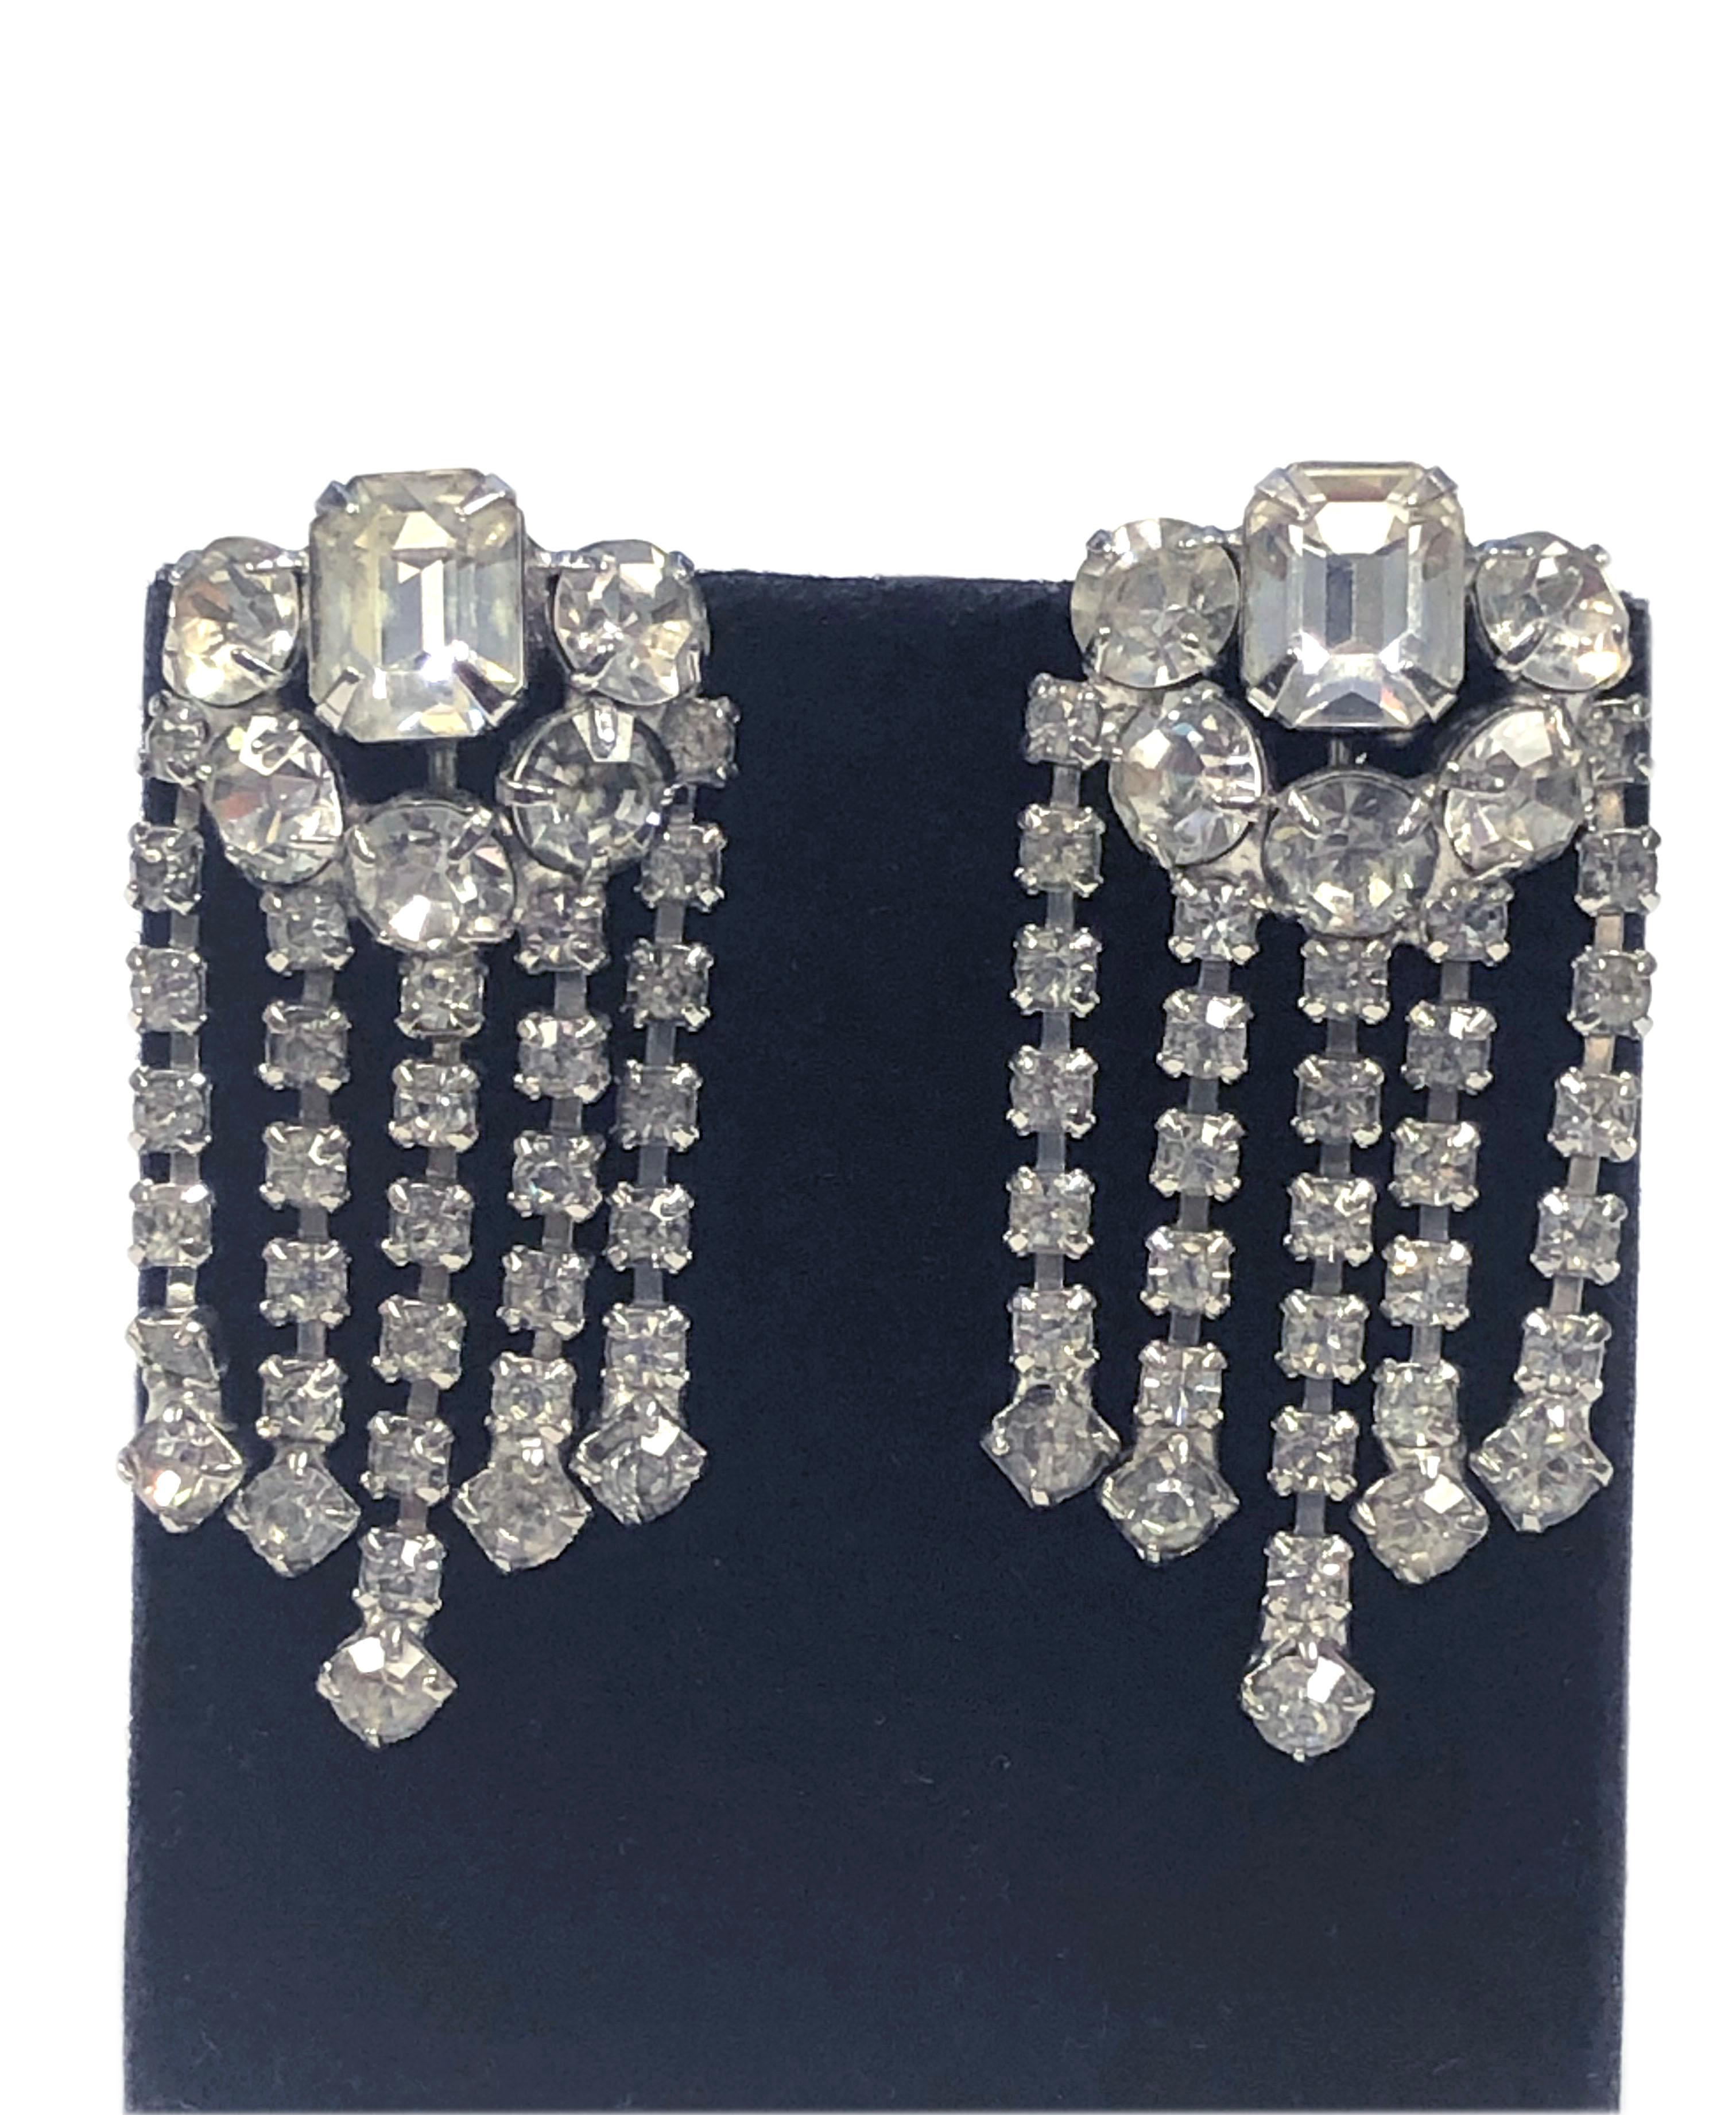 Circa 1950s White Metal and Paste Foil Back Crystal Earrings owned and worn by Icon Marilyn Monroe, set in White metal and  Measuring 2 inches in length and 1 inch wide, each stone is prong set, screw backs. Comes with the Original Auction catalog